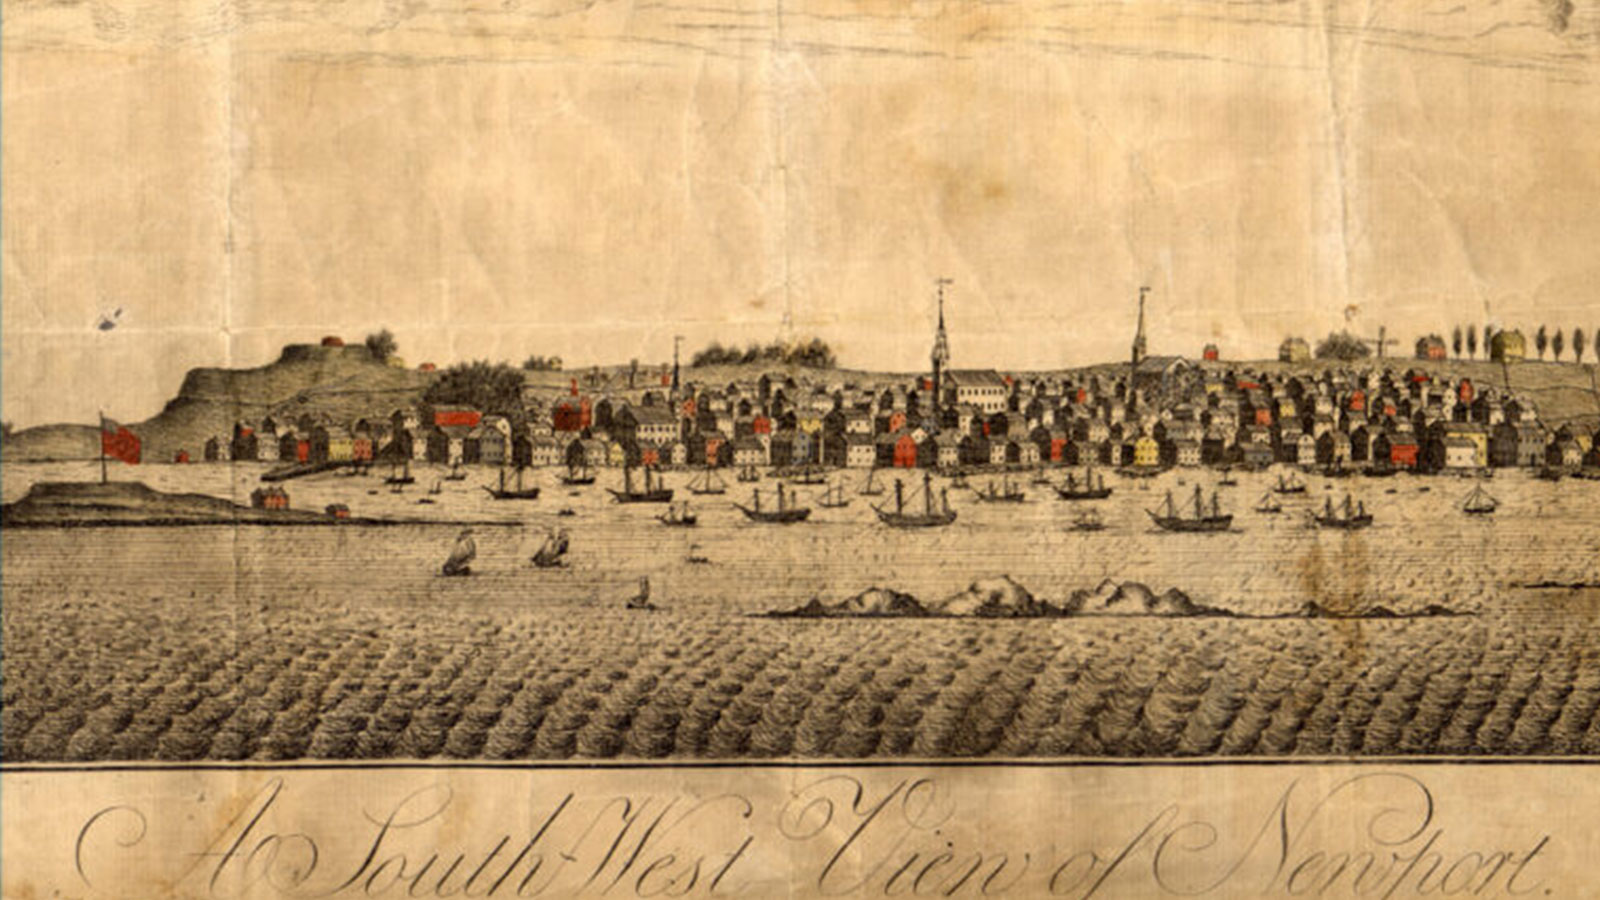  A depiction of Newport harbor in 1795.